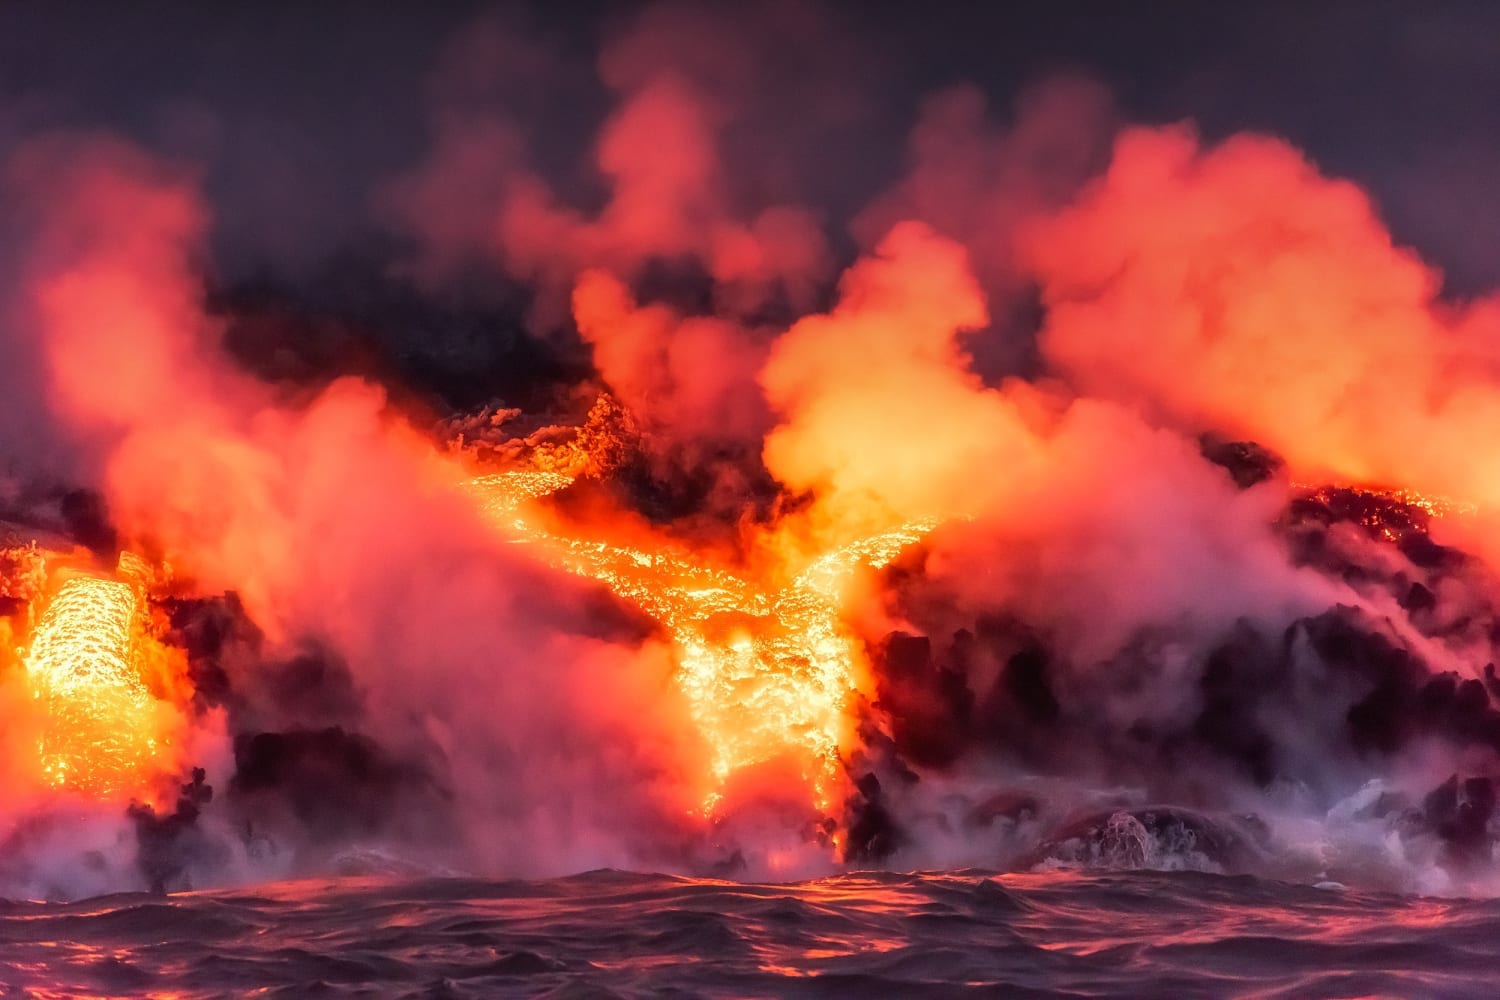 Rivers of lava entering the Pacific as Kilauea erupts by Mike Mezeul II